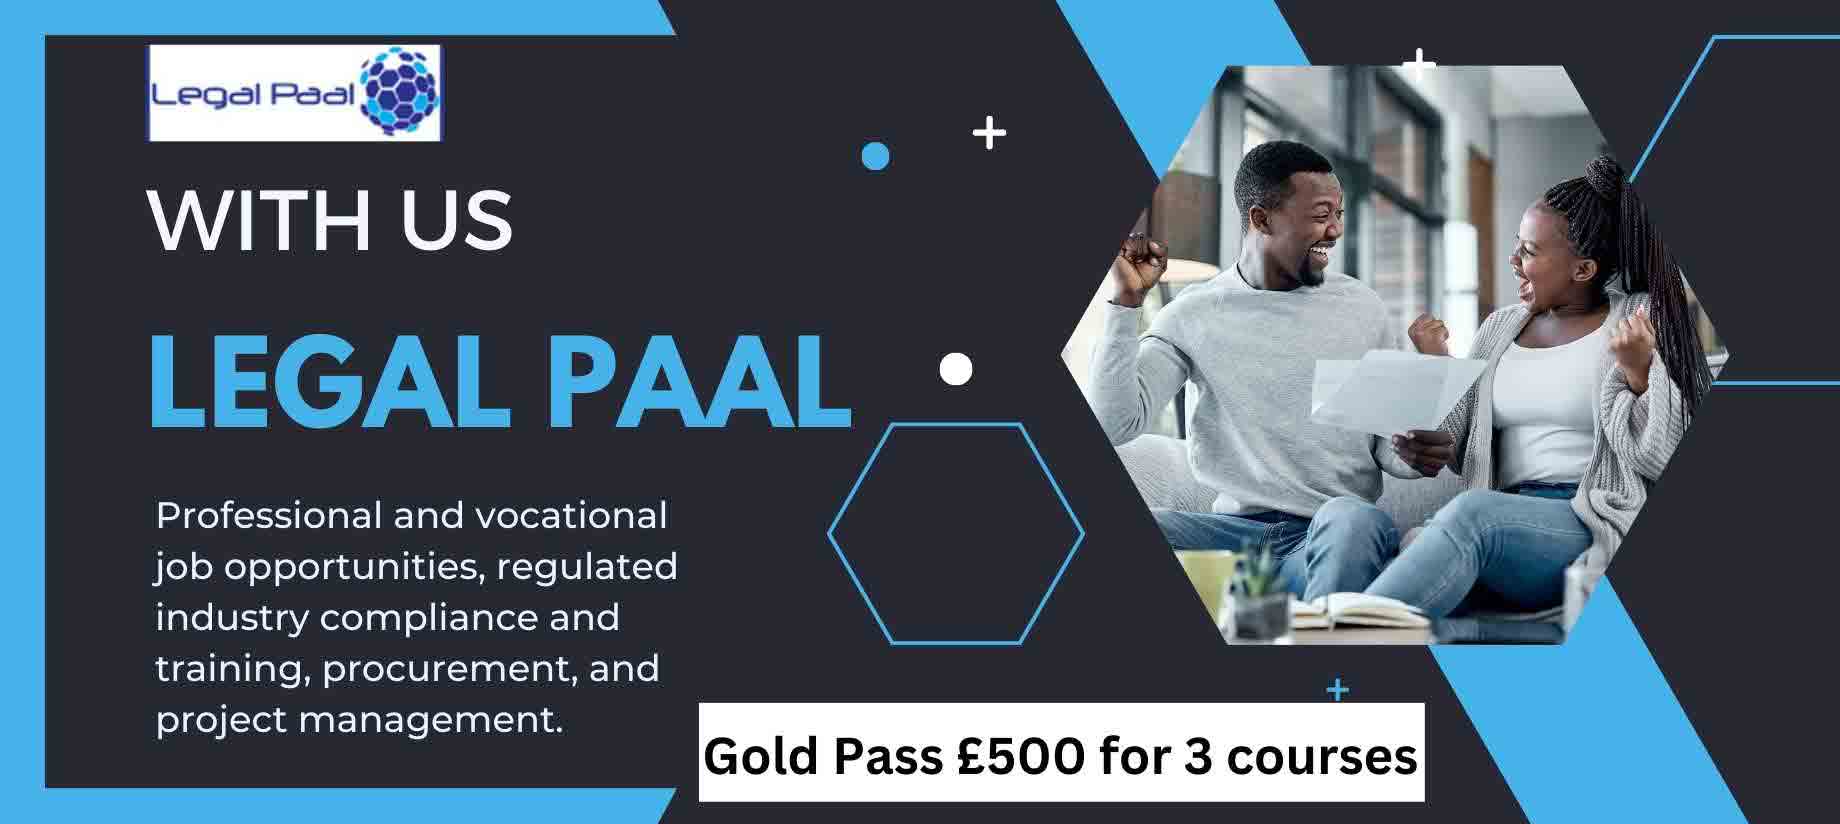 Gold Pass £500 for 3 courses - Banner Image on Legal Paal